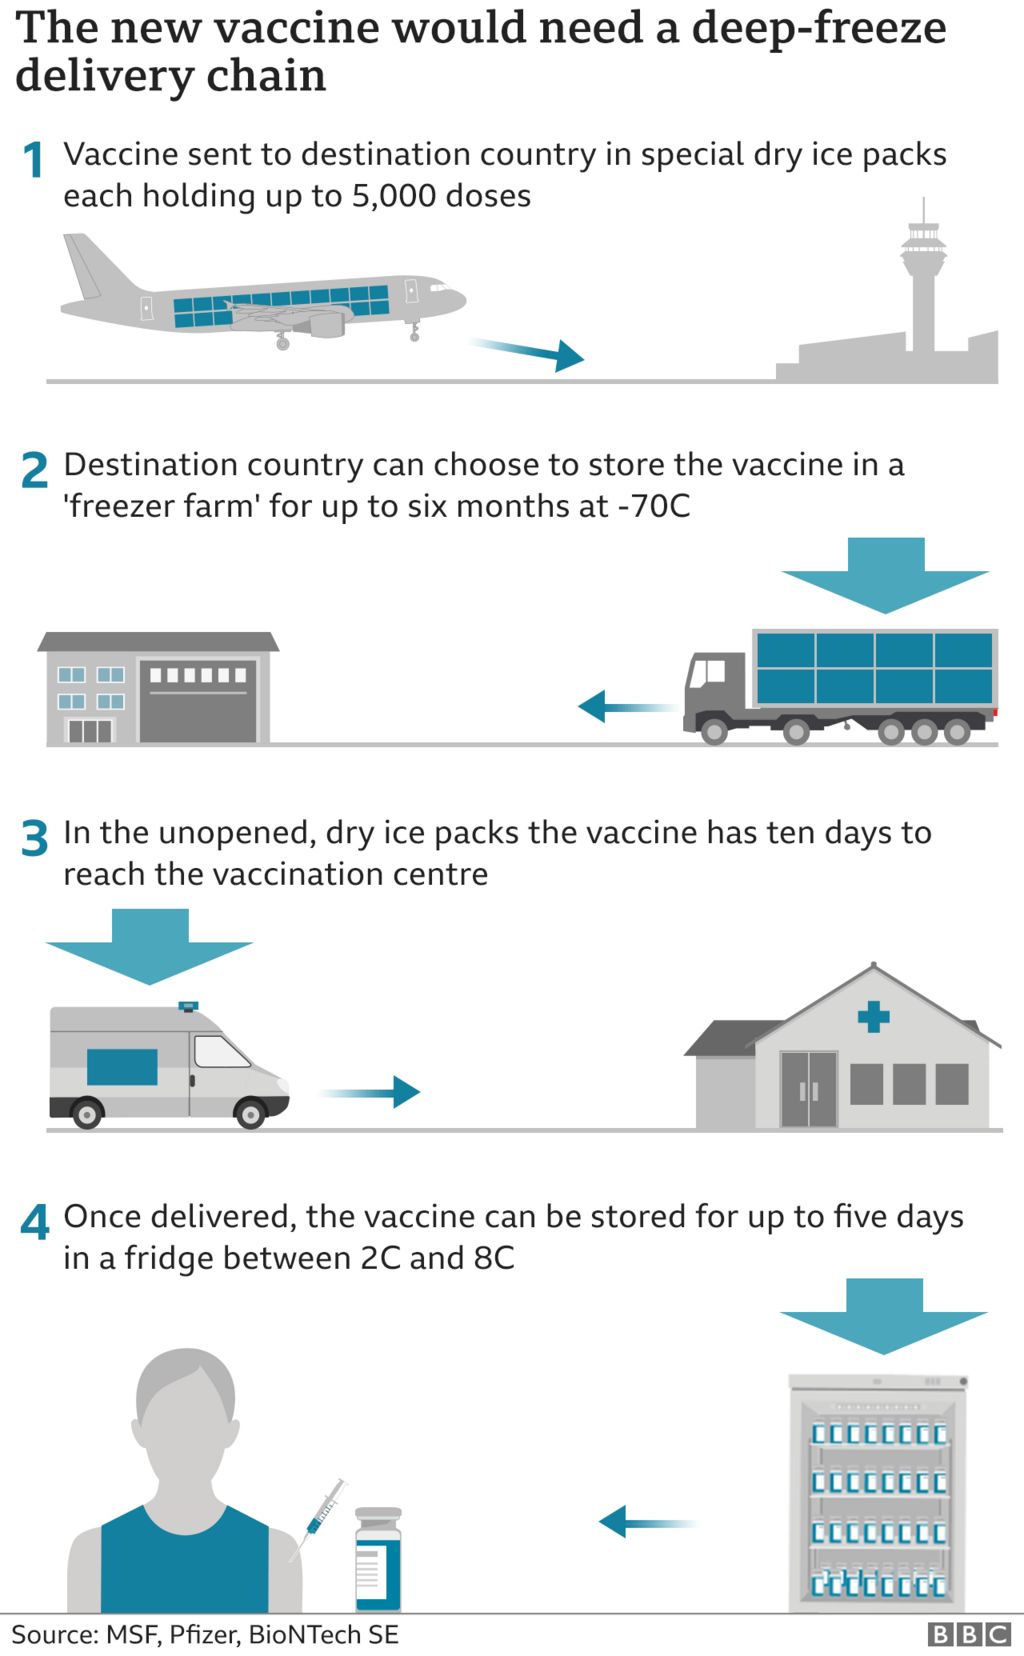 Graphic illustrating how the cold chain would work to deliver the vaccine to local vaccination centres.